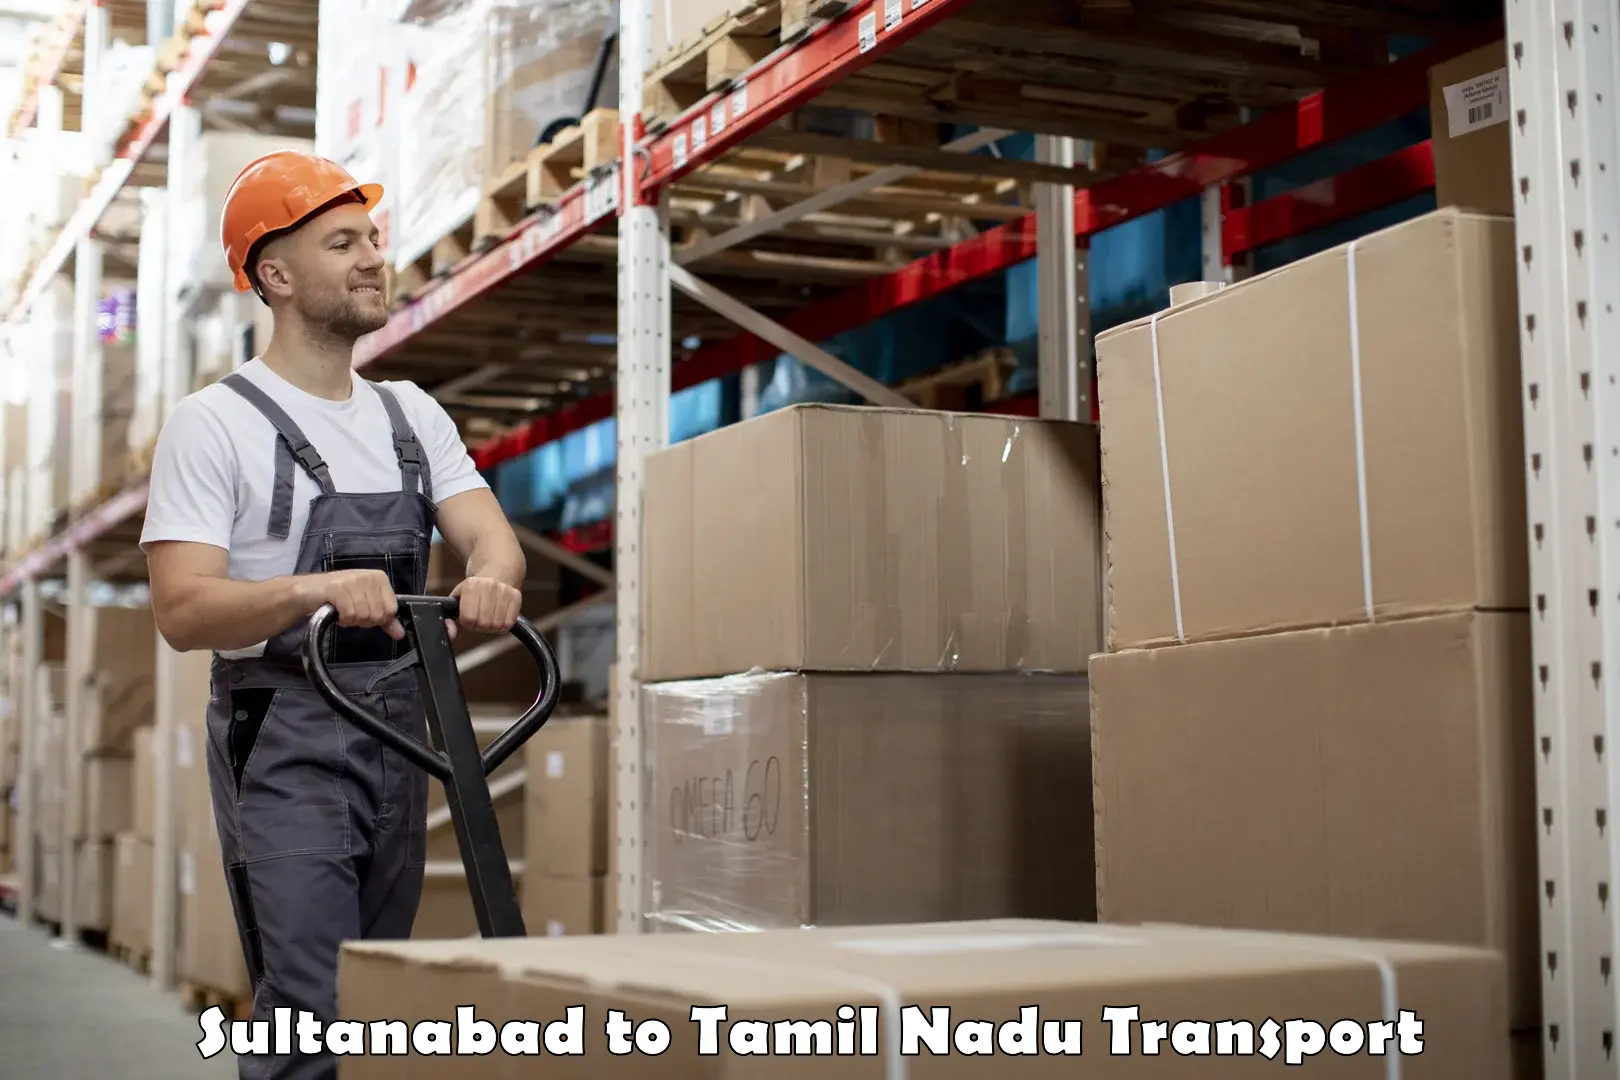 Nearby transport service Sultanabad to Tamil Nadu